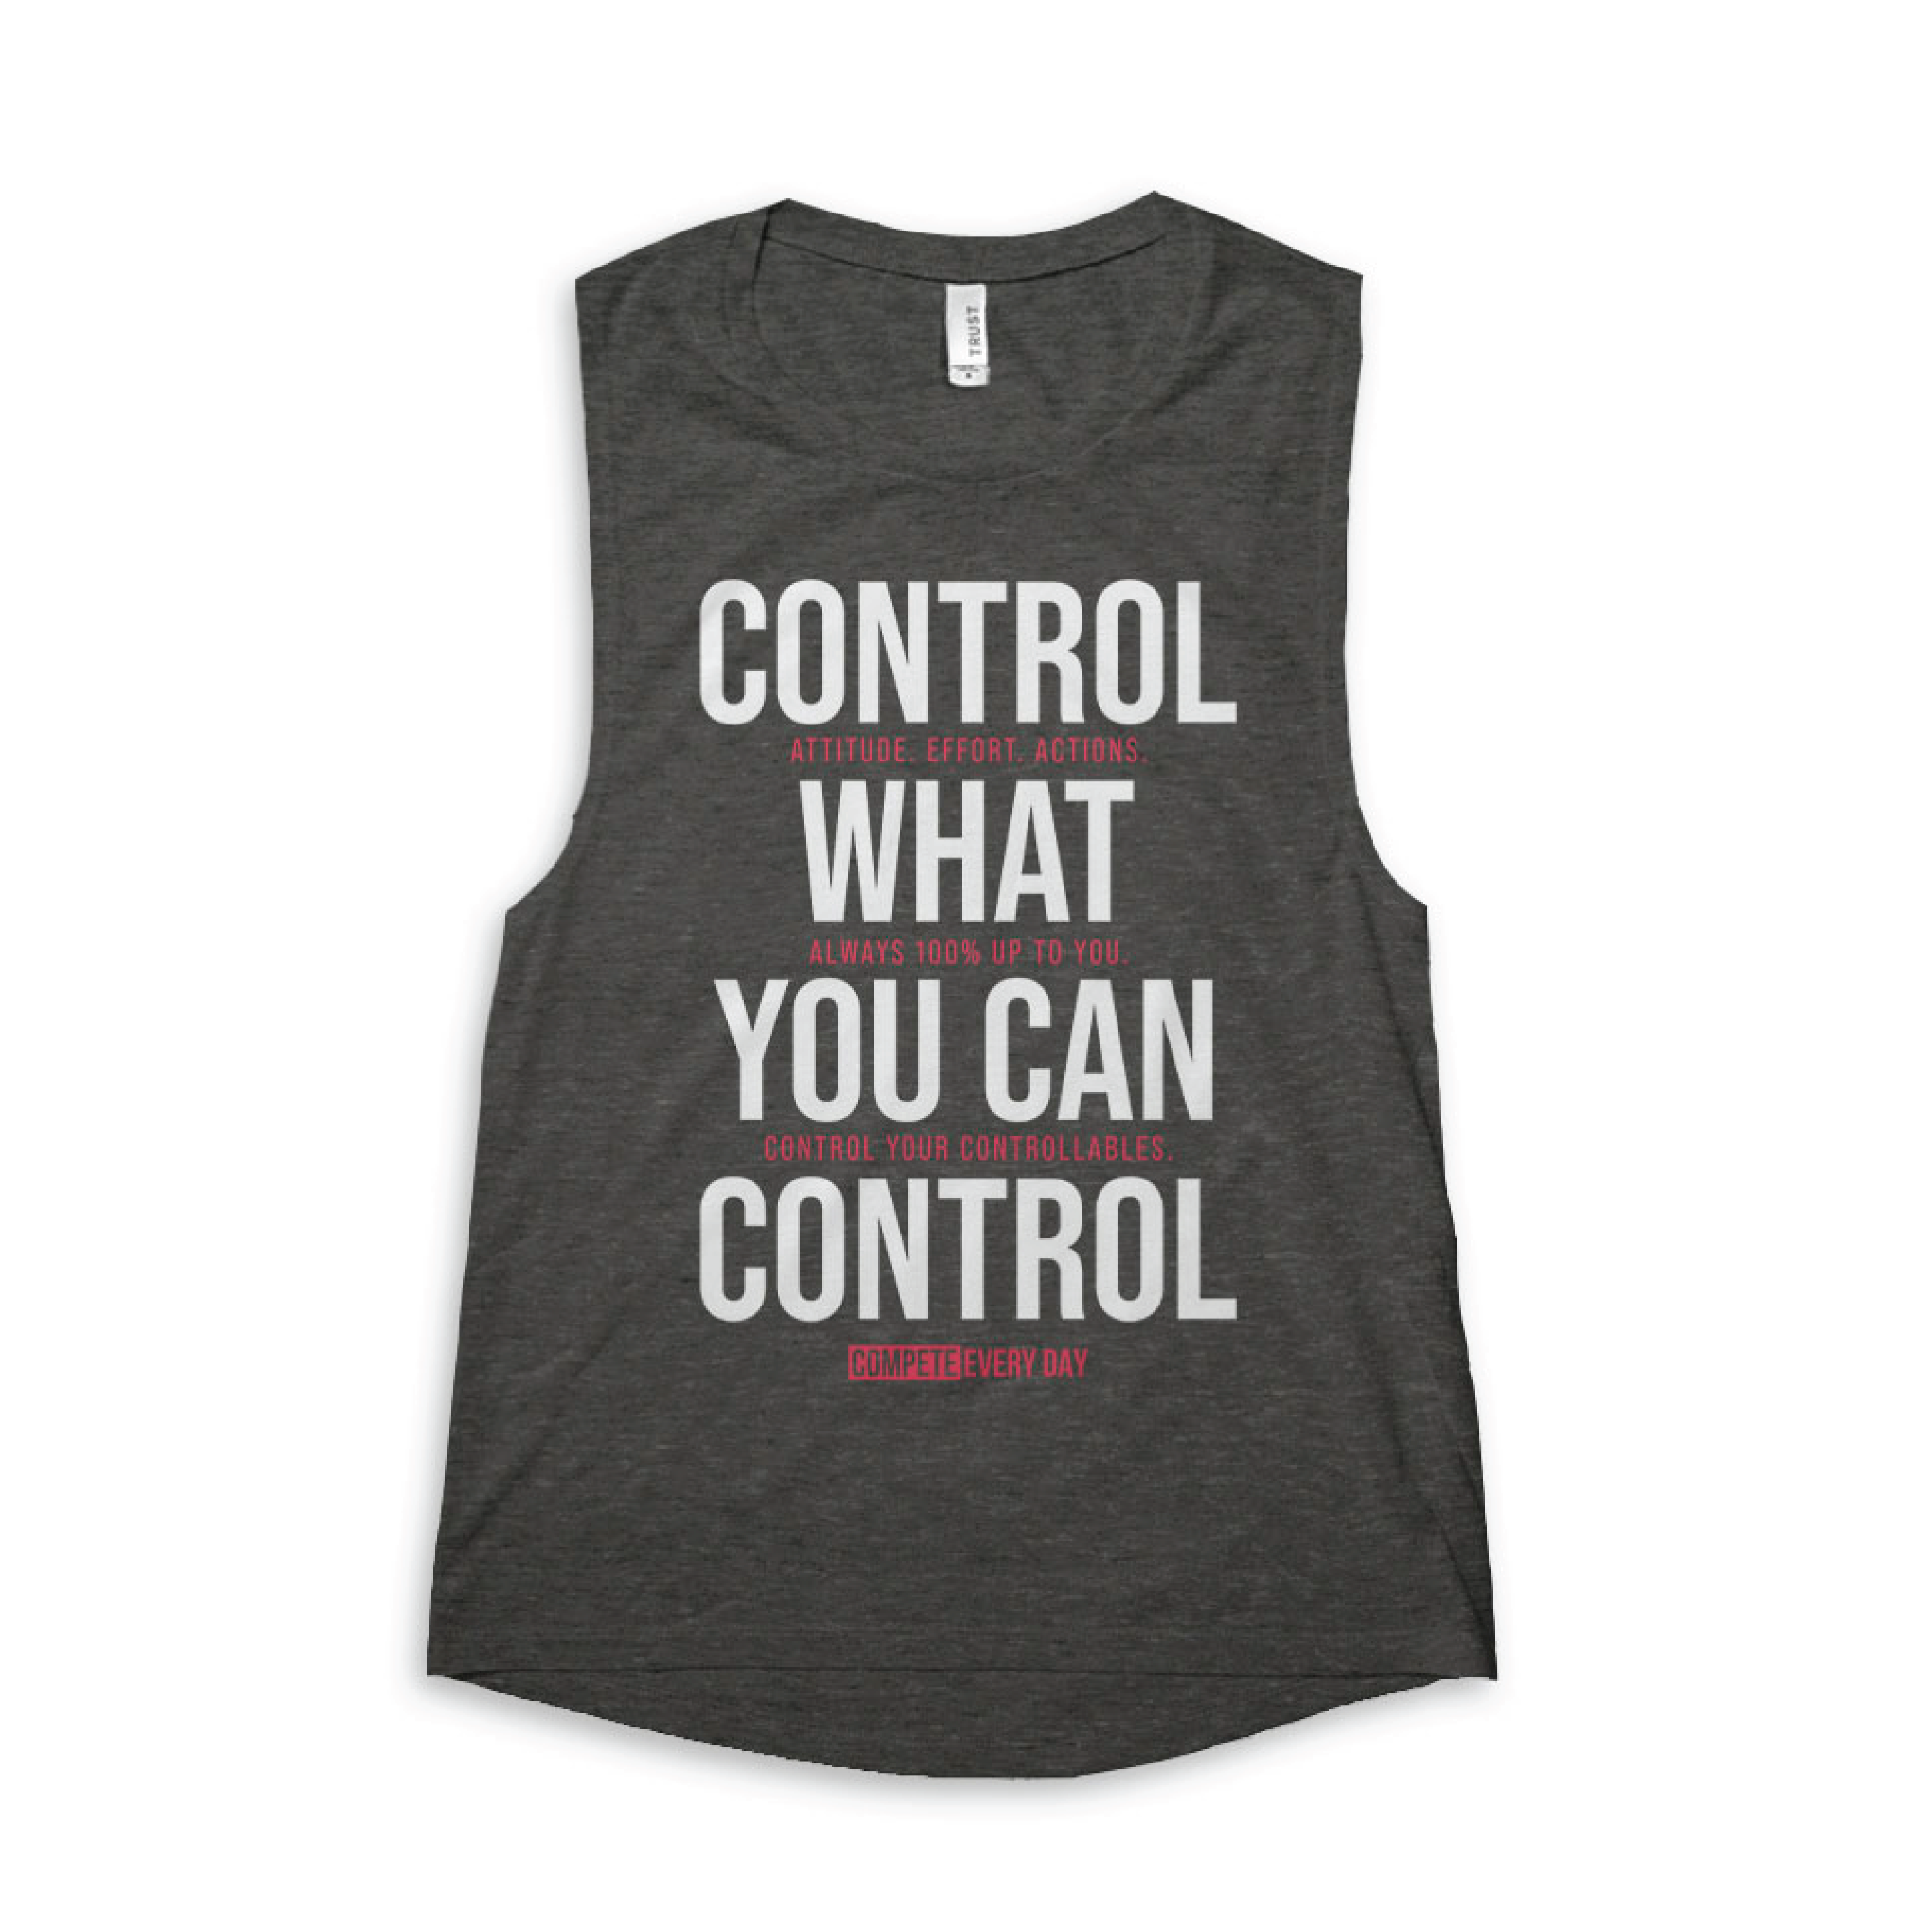 Control the Controllables (XL)